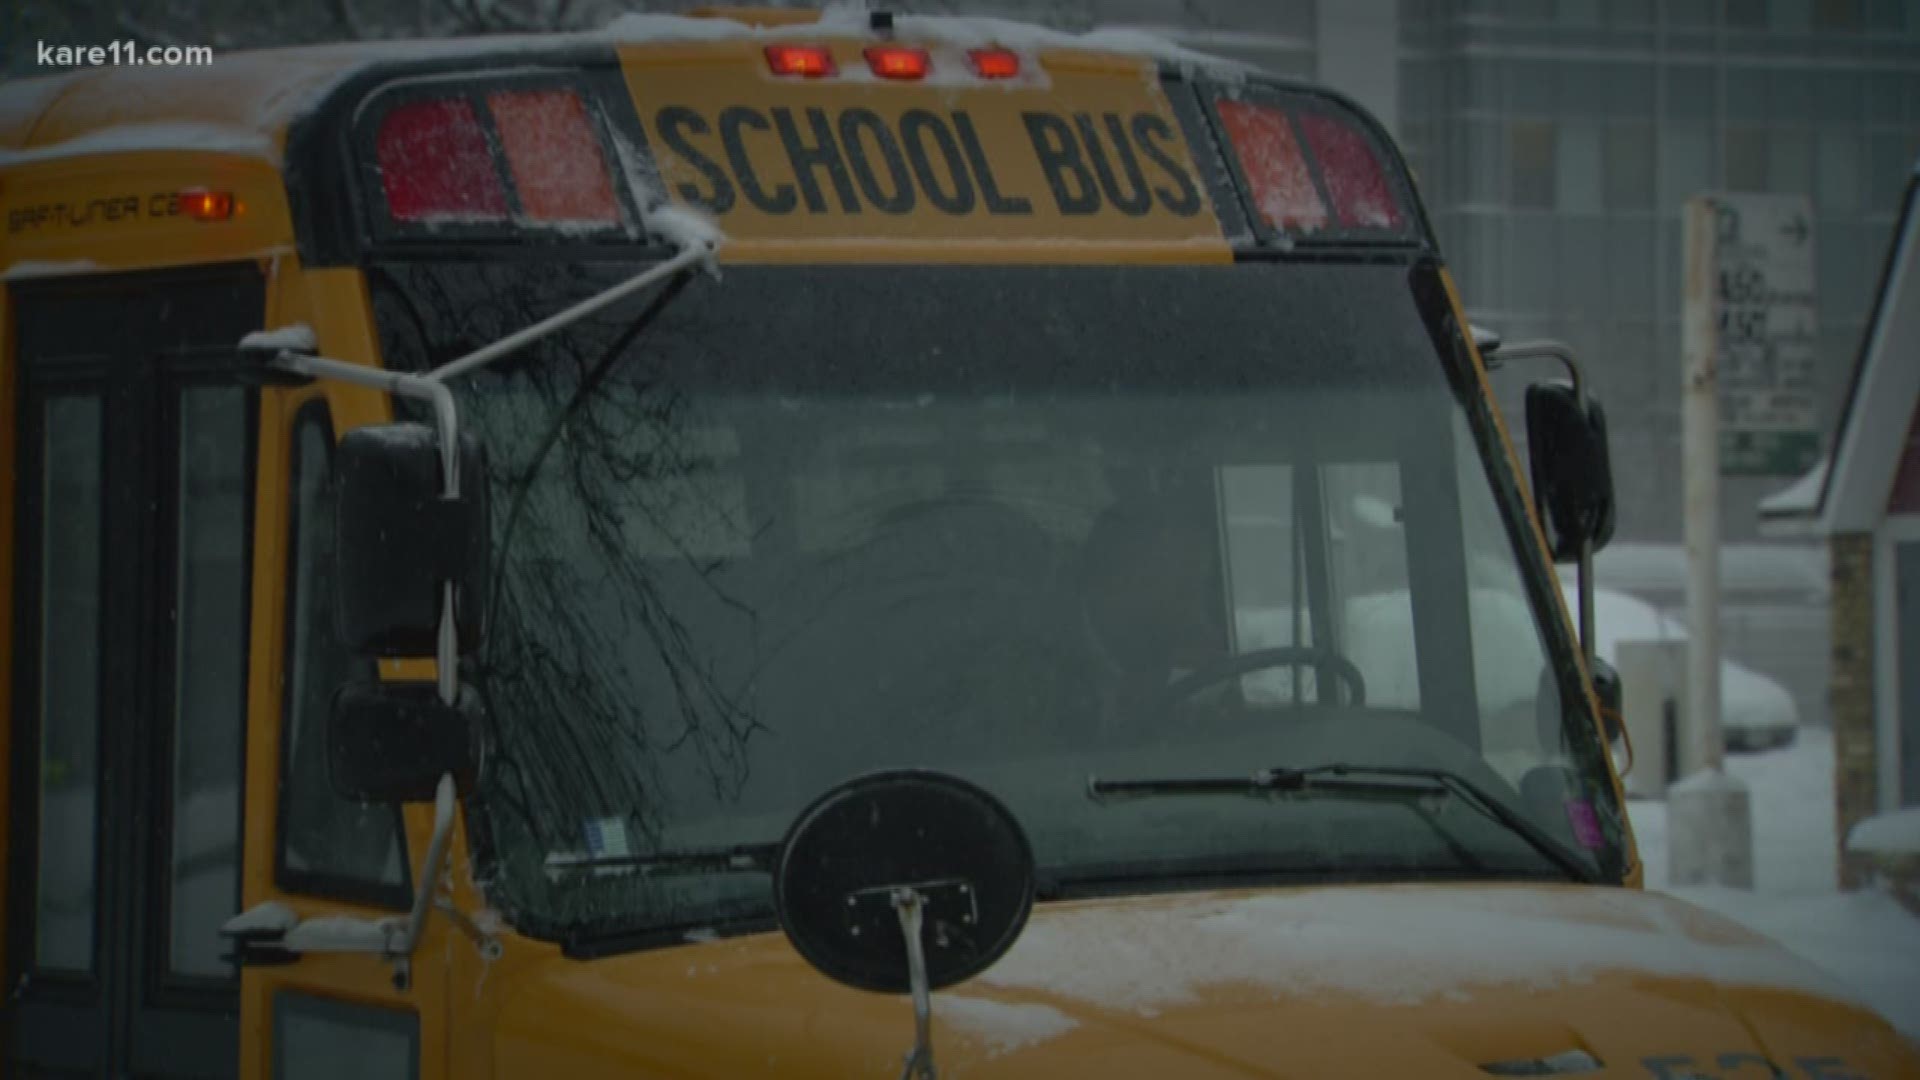 A Minneapolis mother has had to send her son to school using Uber because the school bus continues to miss his stop.